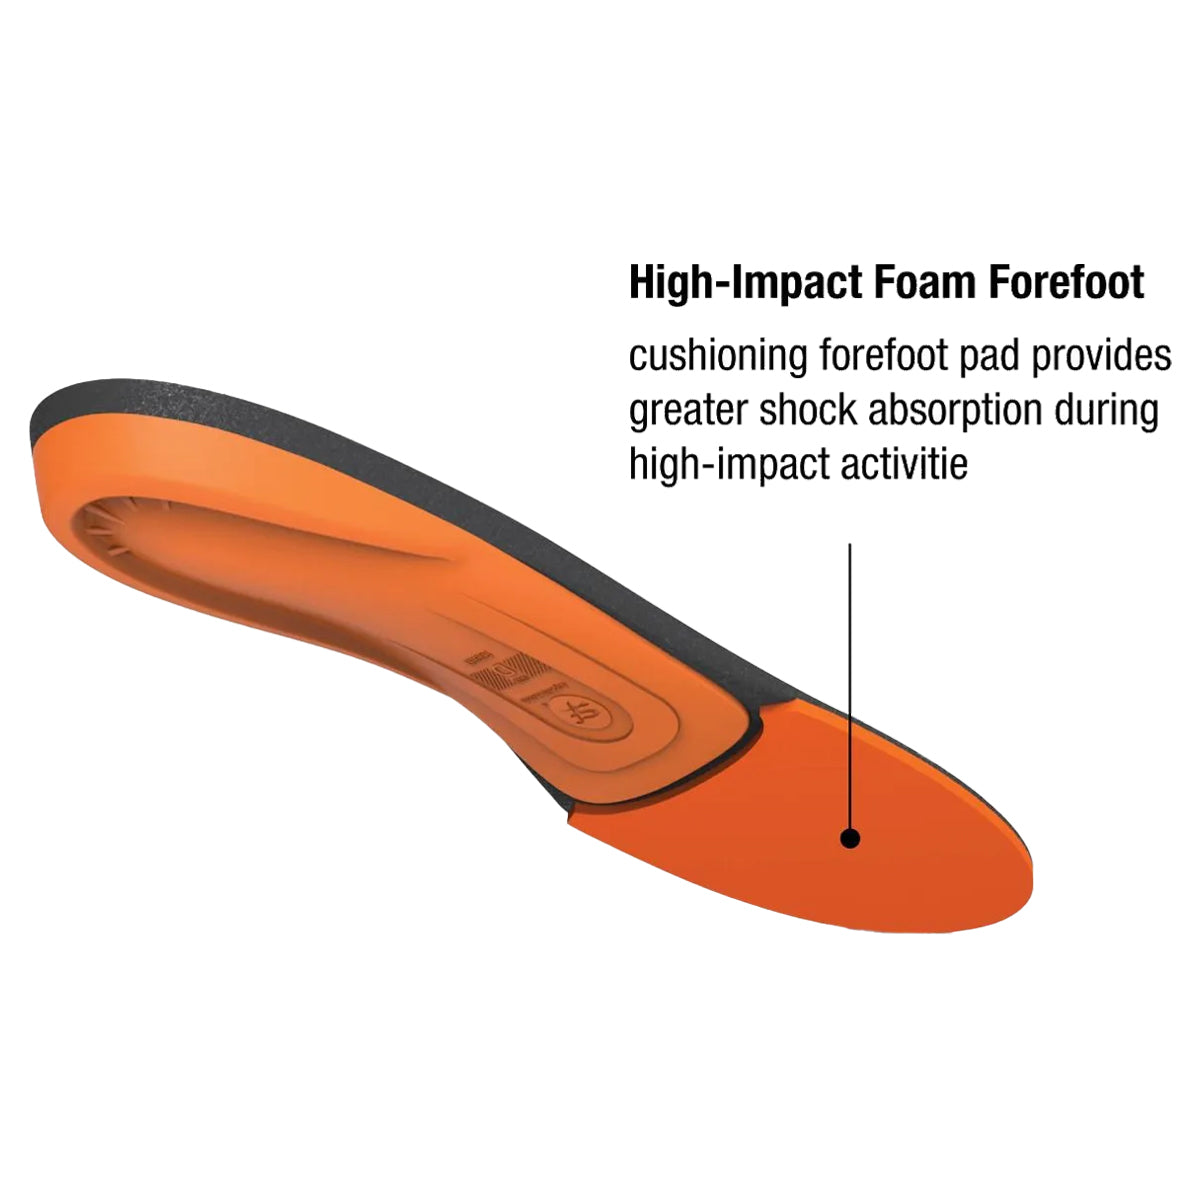 Superfeet All-Purpose High Impact Support Insoles